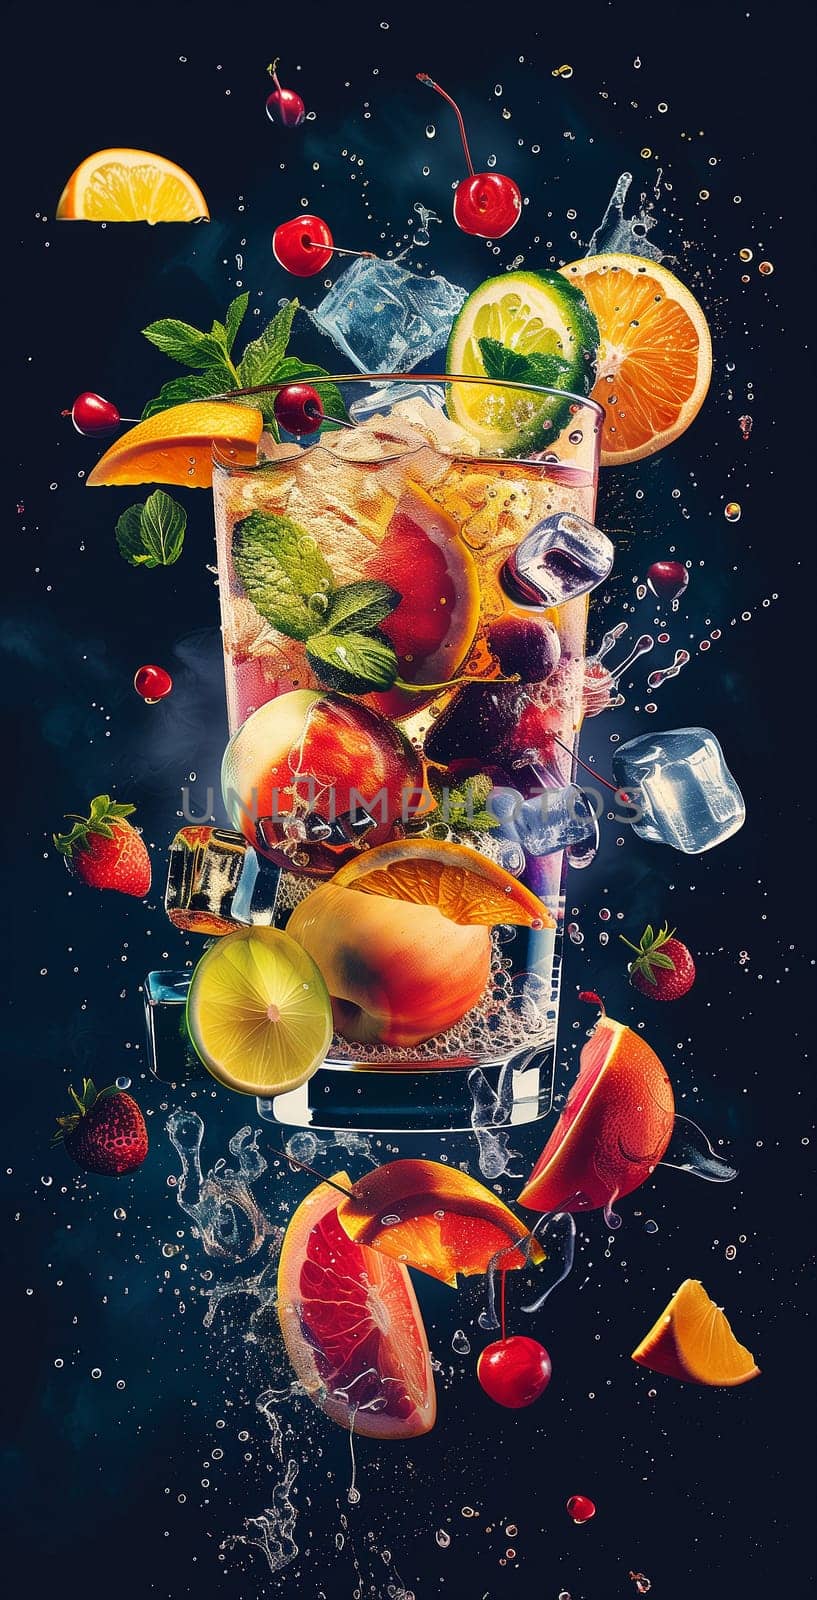 A summer cocktail at the bar. Professional photo of a fruity alcoholic cocktail. Menu cover. High quality illustration